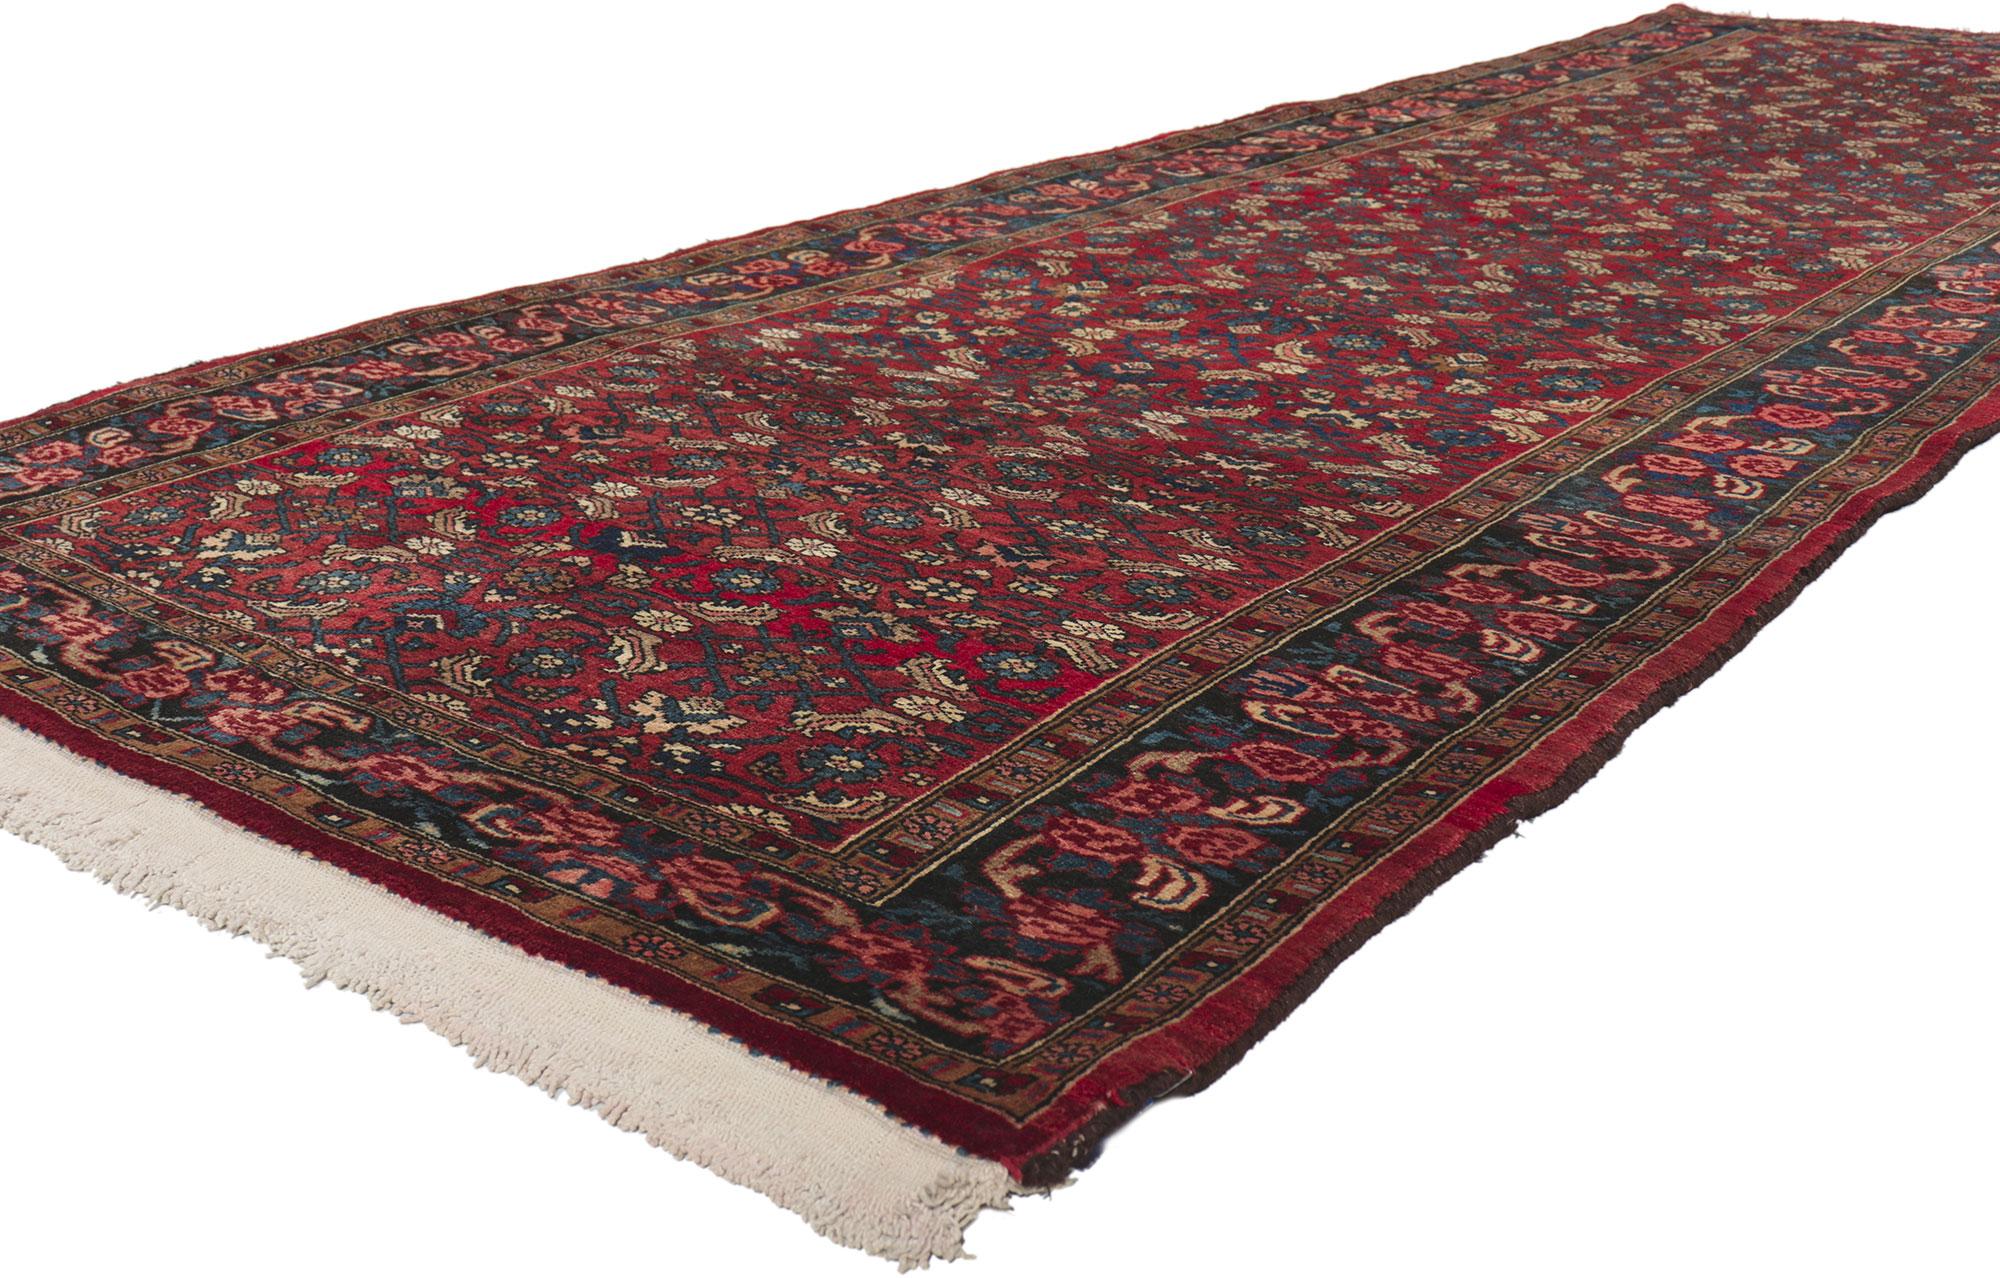 61175 Antique Persian Bijar Runner, 04'04 x 12'05.
?With its effortless beauty, incredible detail and texture, this hand knotted wool antique Persian Bijar runner is a captivating vision of woven beauty. The Classic Herati design and refined